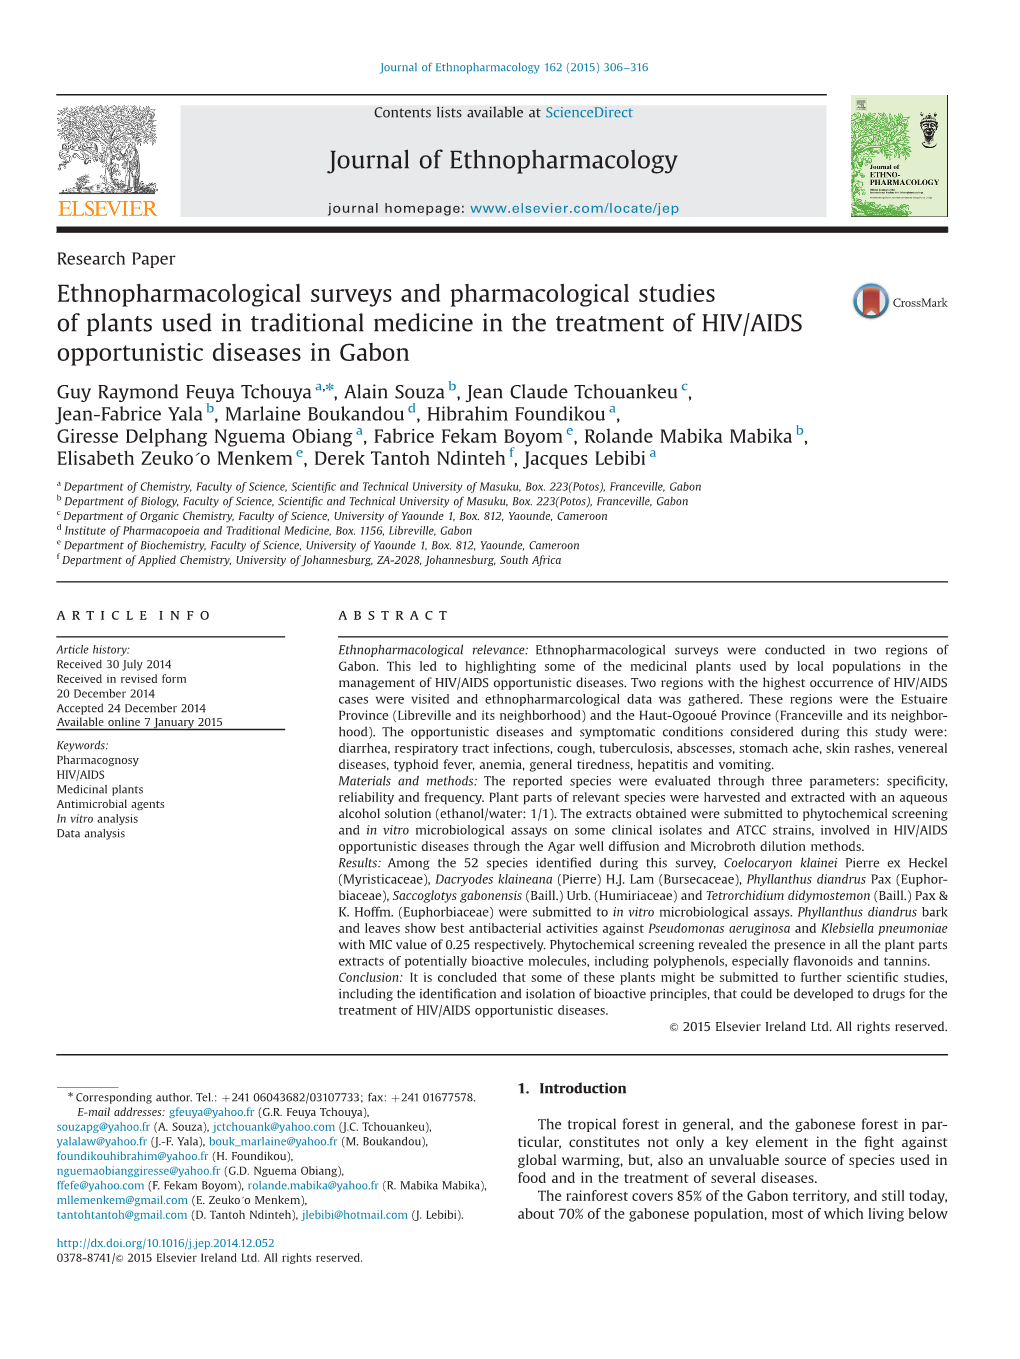 Ethnopharmacological Surveys and Pharmacological Studies of Plants Used in Traditional Medicine in the Treatment of HIV/AIDS Opportunistic Diseases in Gabon